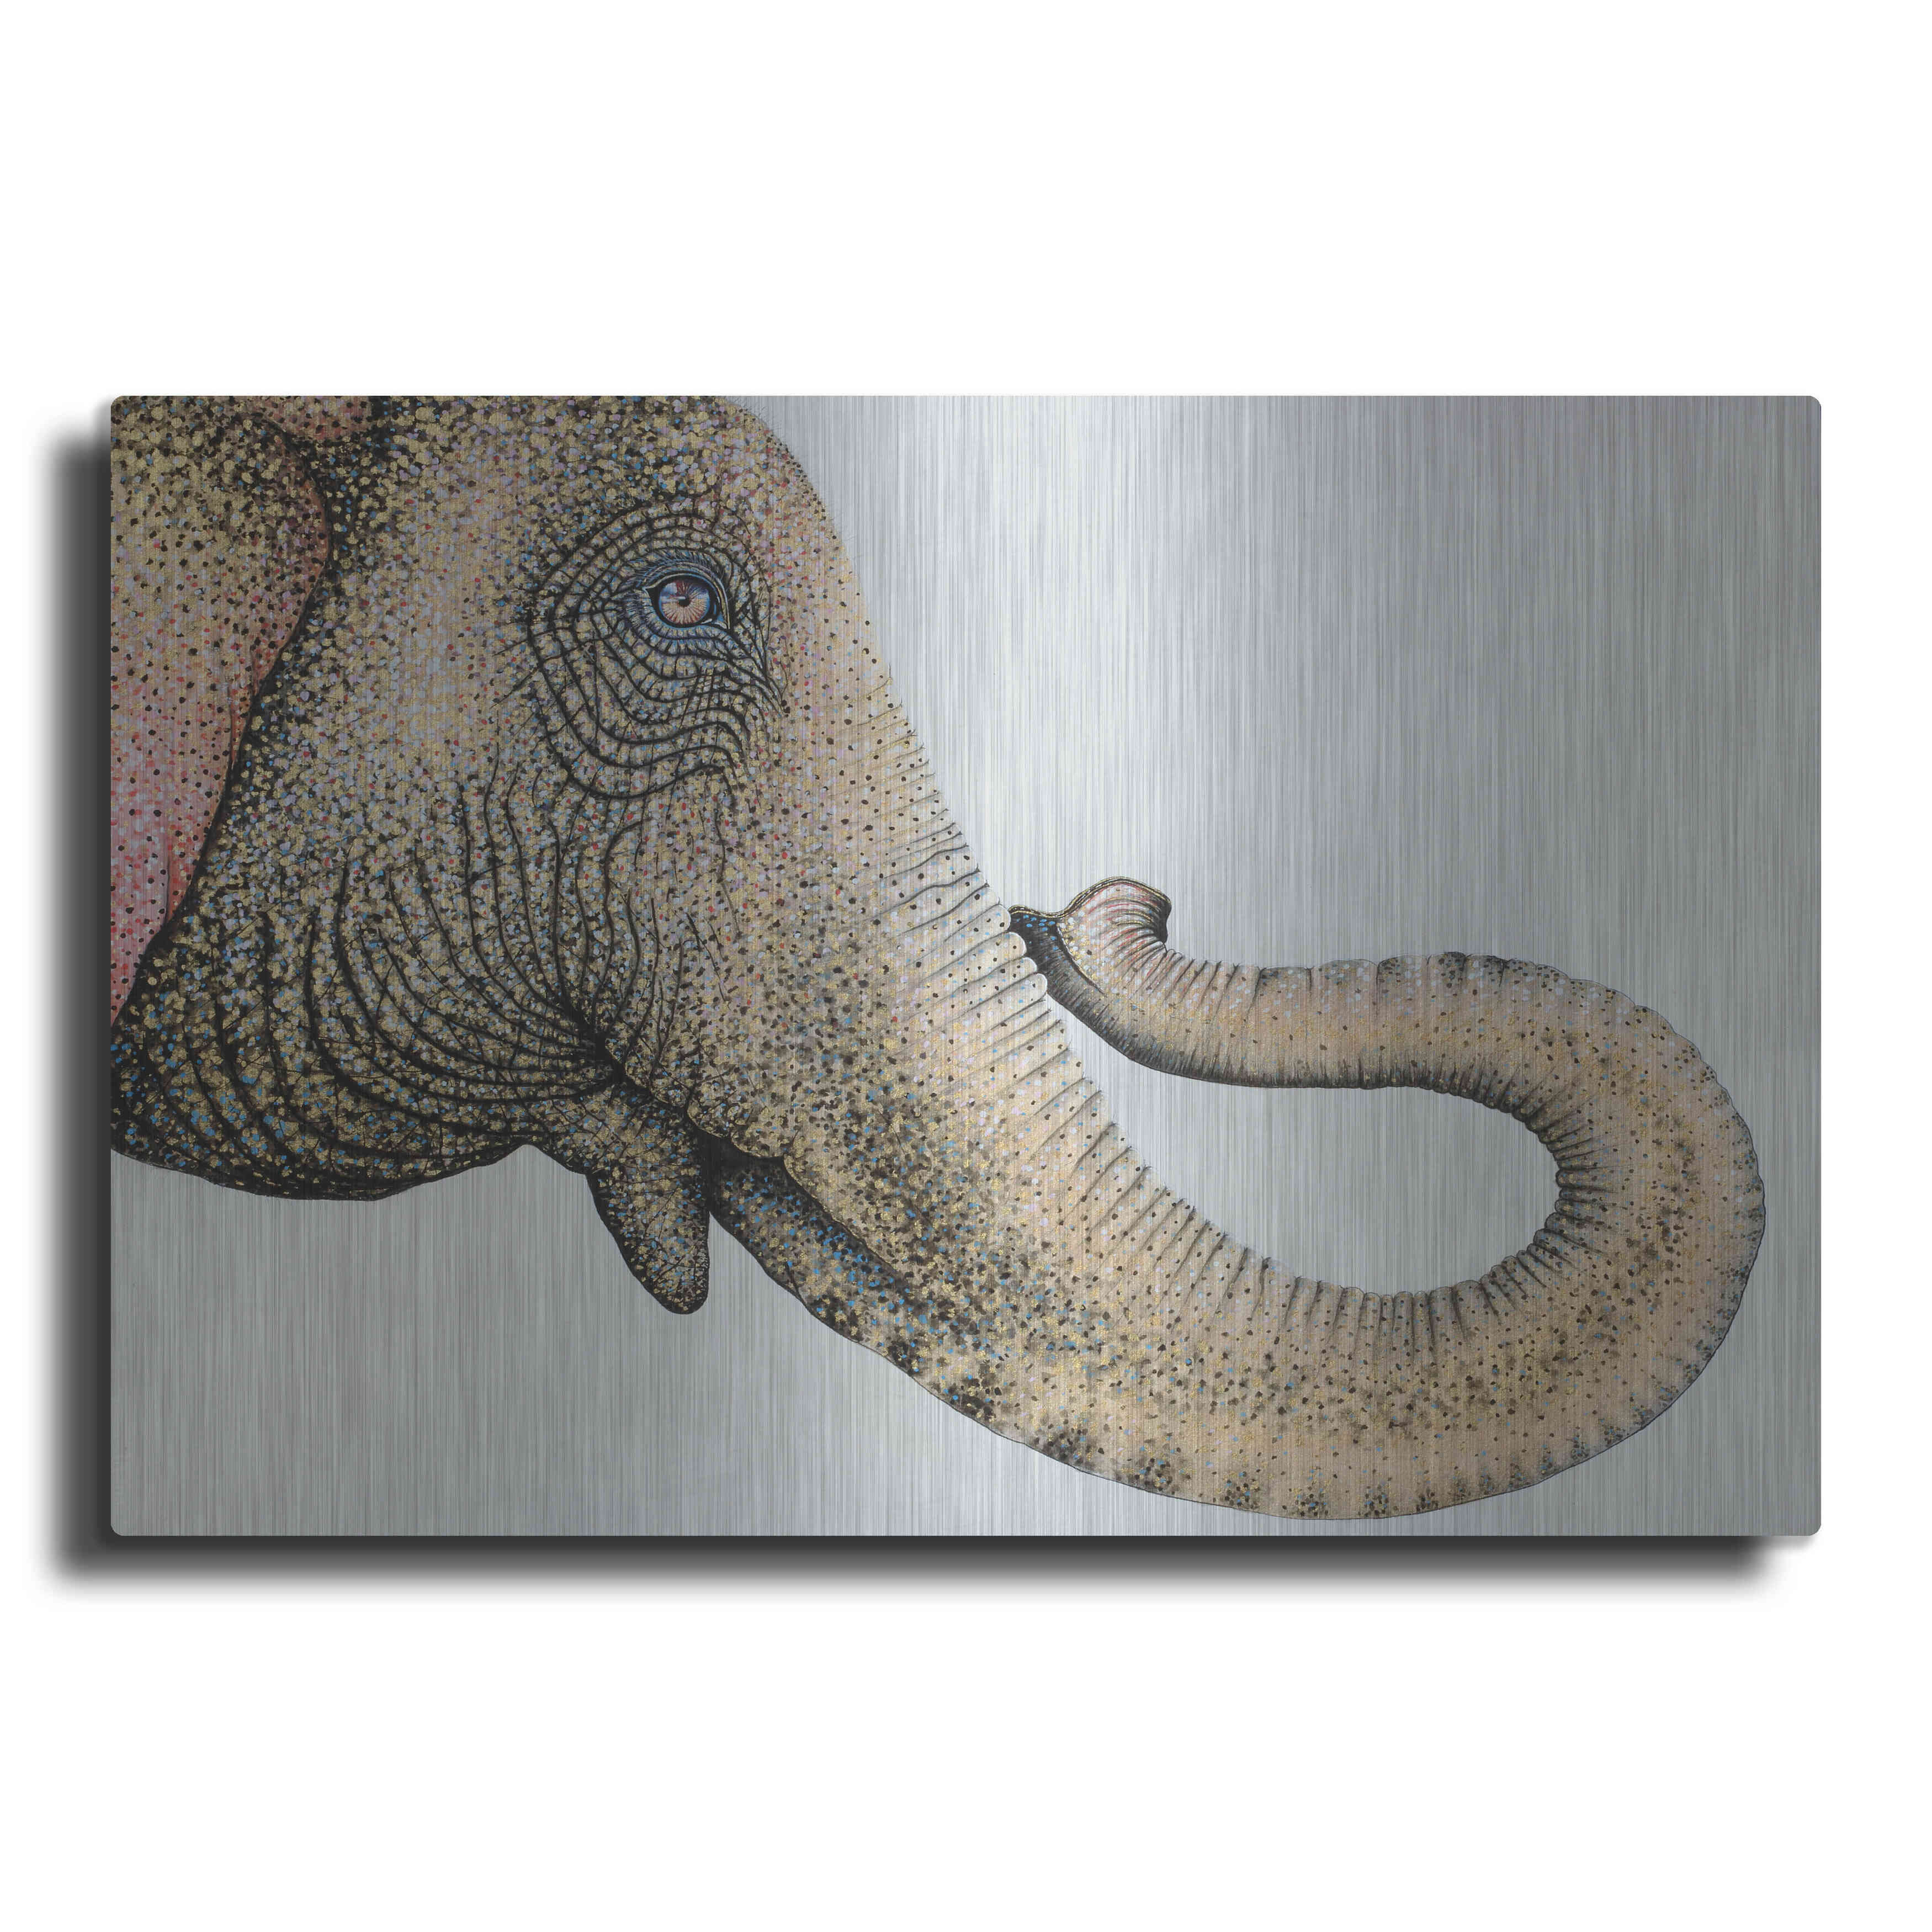 Luxe Metal Art 'Spotted Asian Elephant 2' by Miche Spotted Asian Elephant 2 by - Graphic Art on Dakota Fields Size: 36 W x 24 H